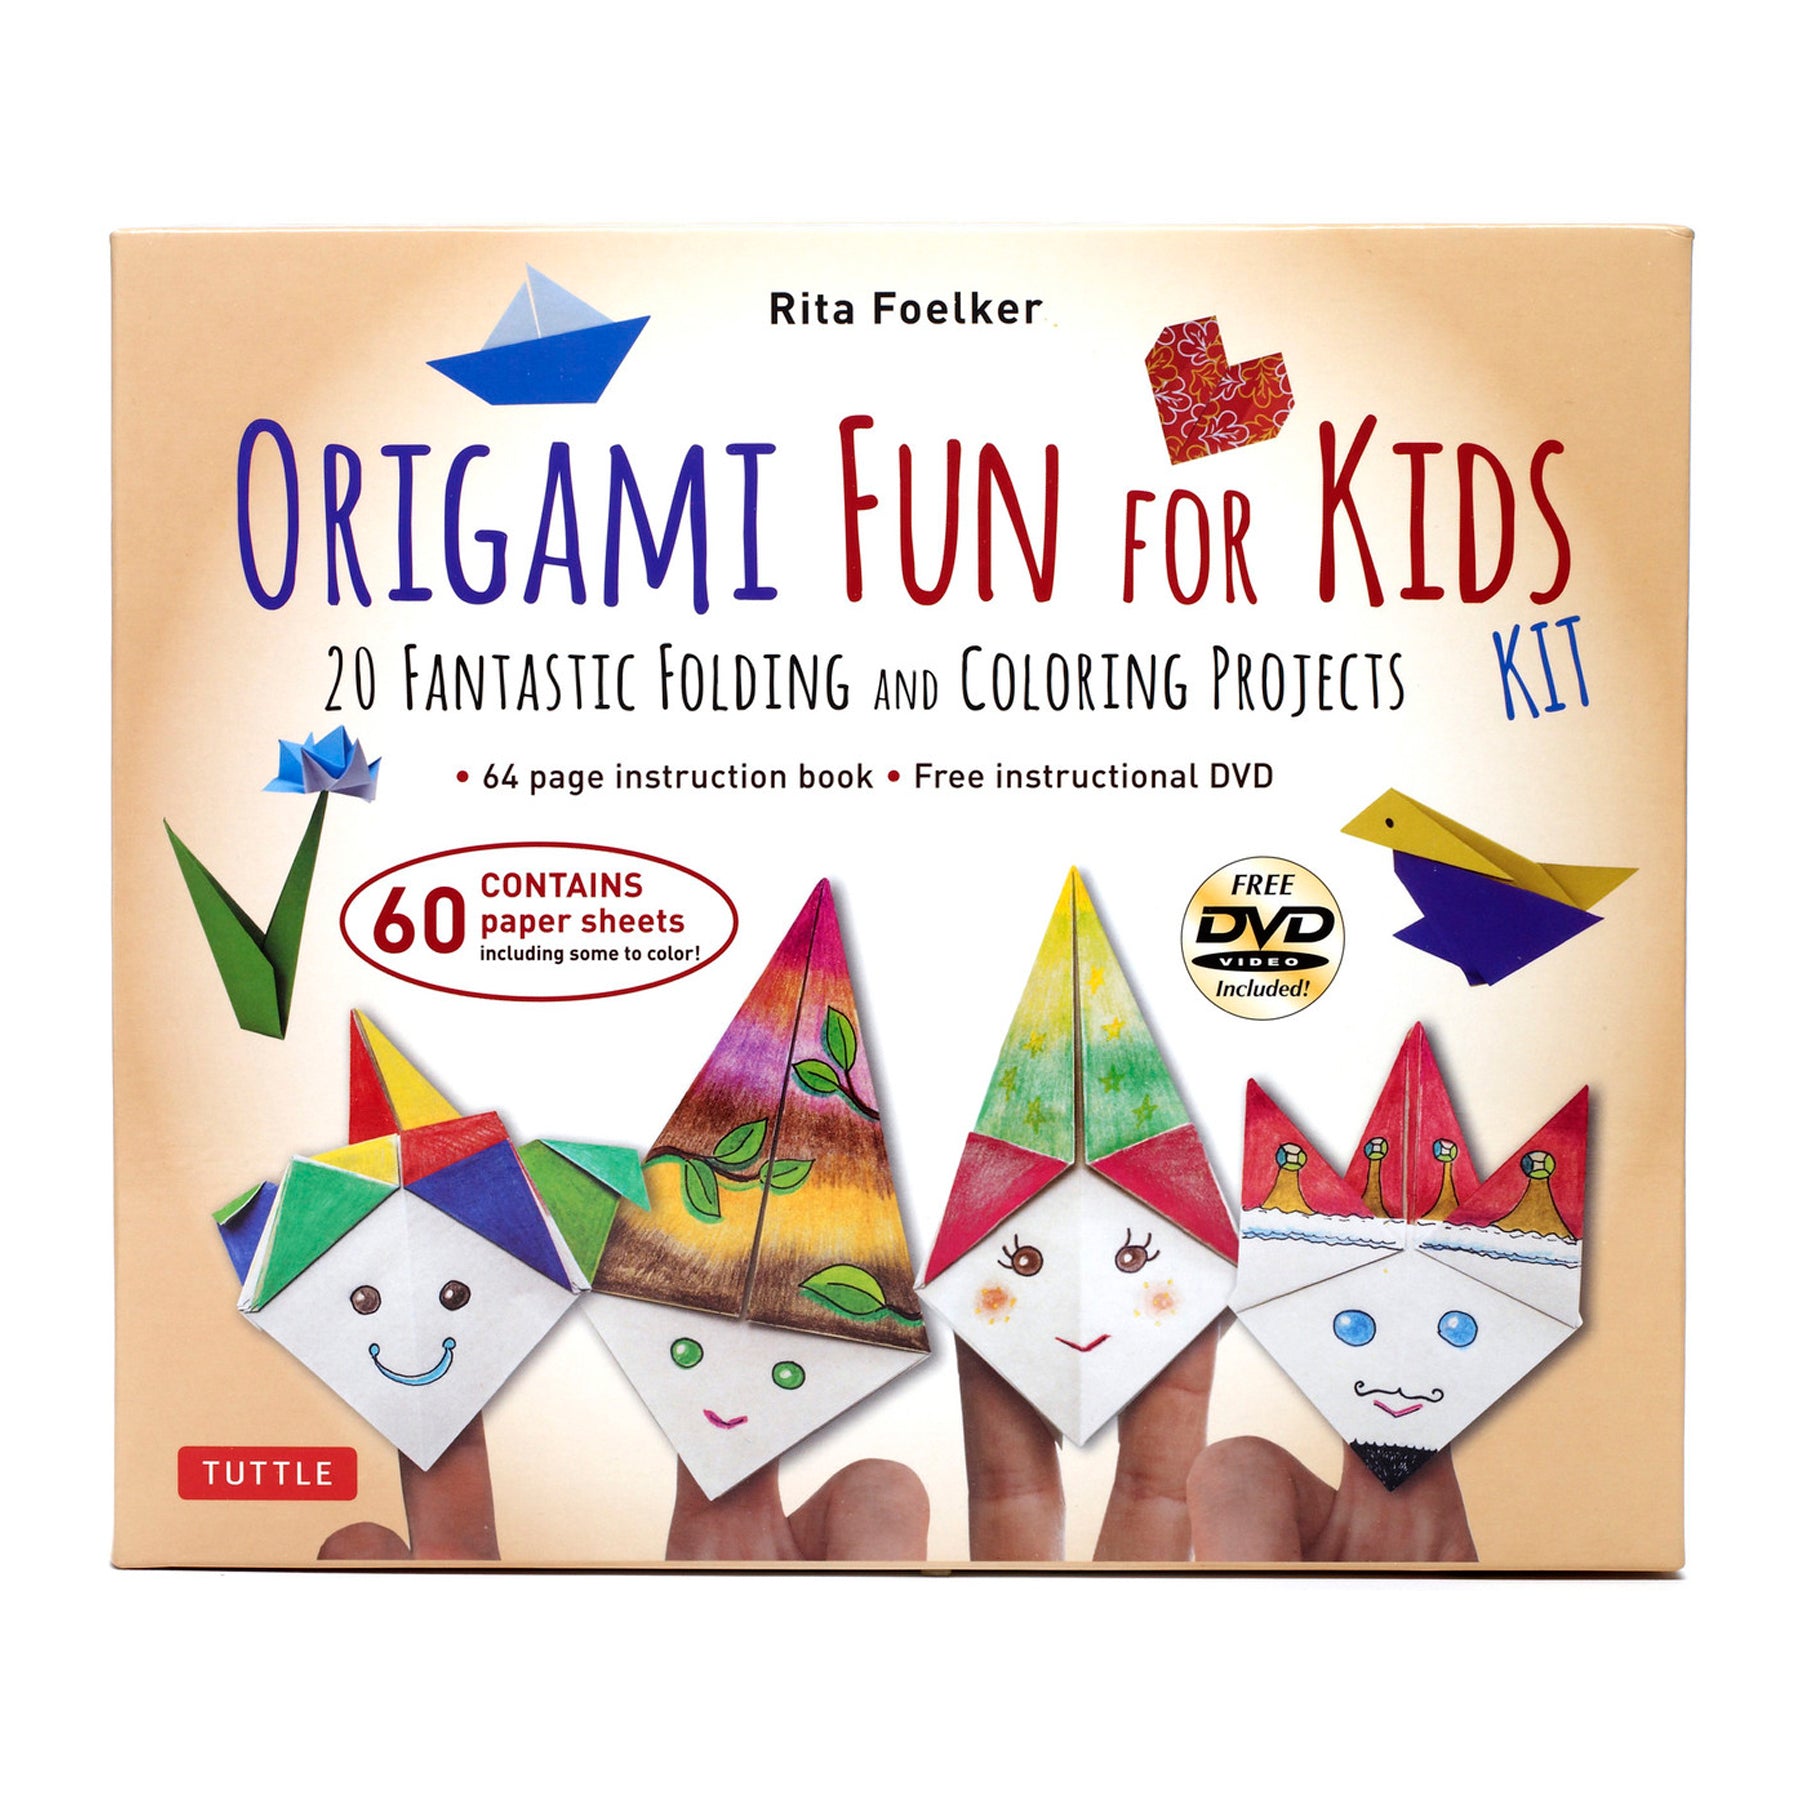 My First Origami Kit for Kids - Make and Takes